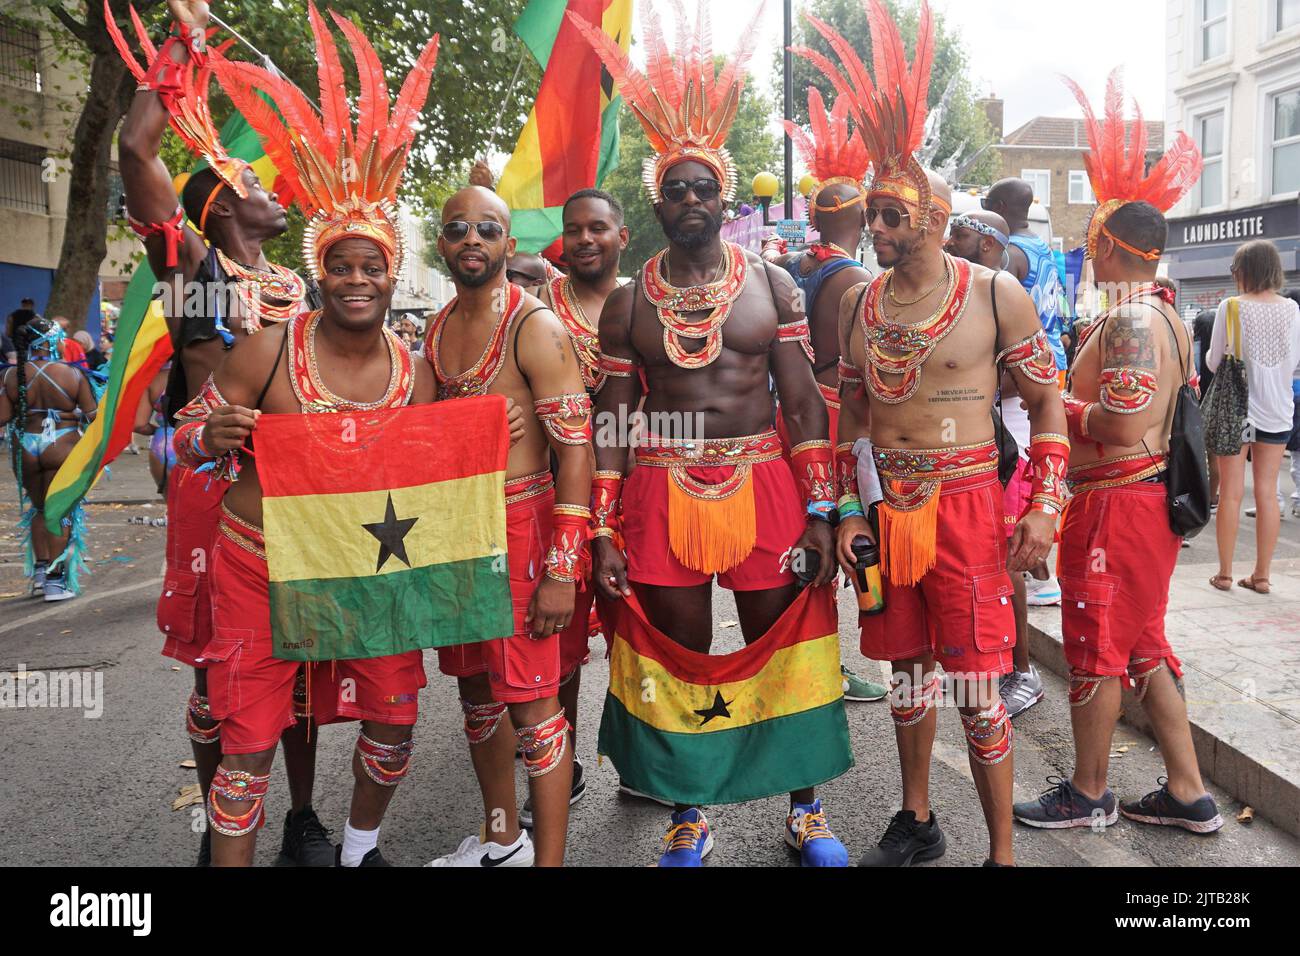 Notting Hill, London, UK. 29th Aug, 2022. Londoners and tourists alike enjoy the last day of Notting Hill Carnival. Participants dress in colourful costumes celebrating this year's event. Credit: Uwe Deffner/Alamy Live News Stock Photo